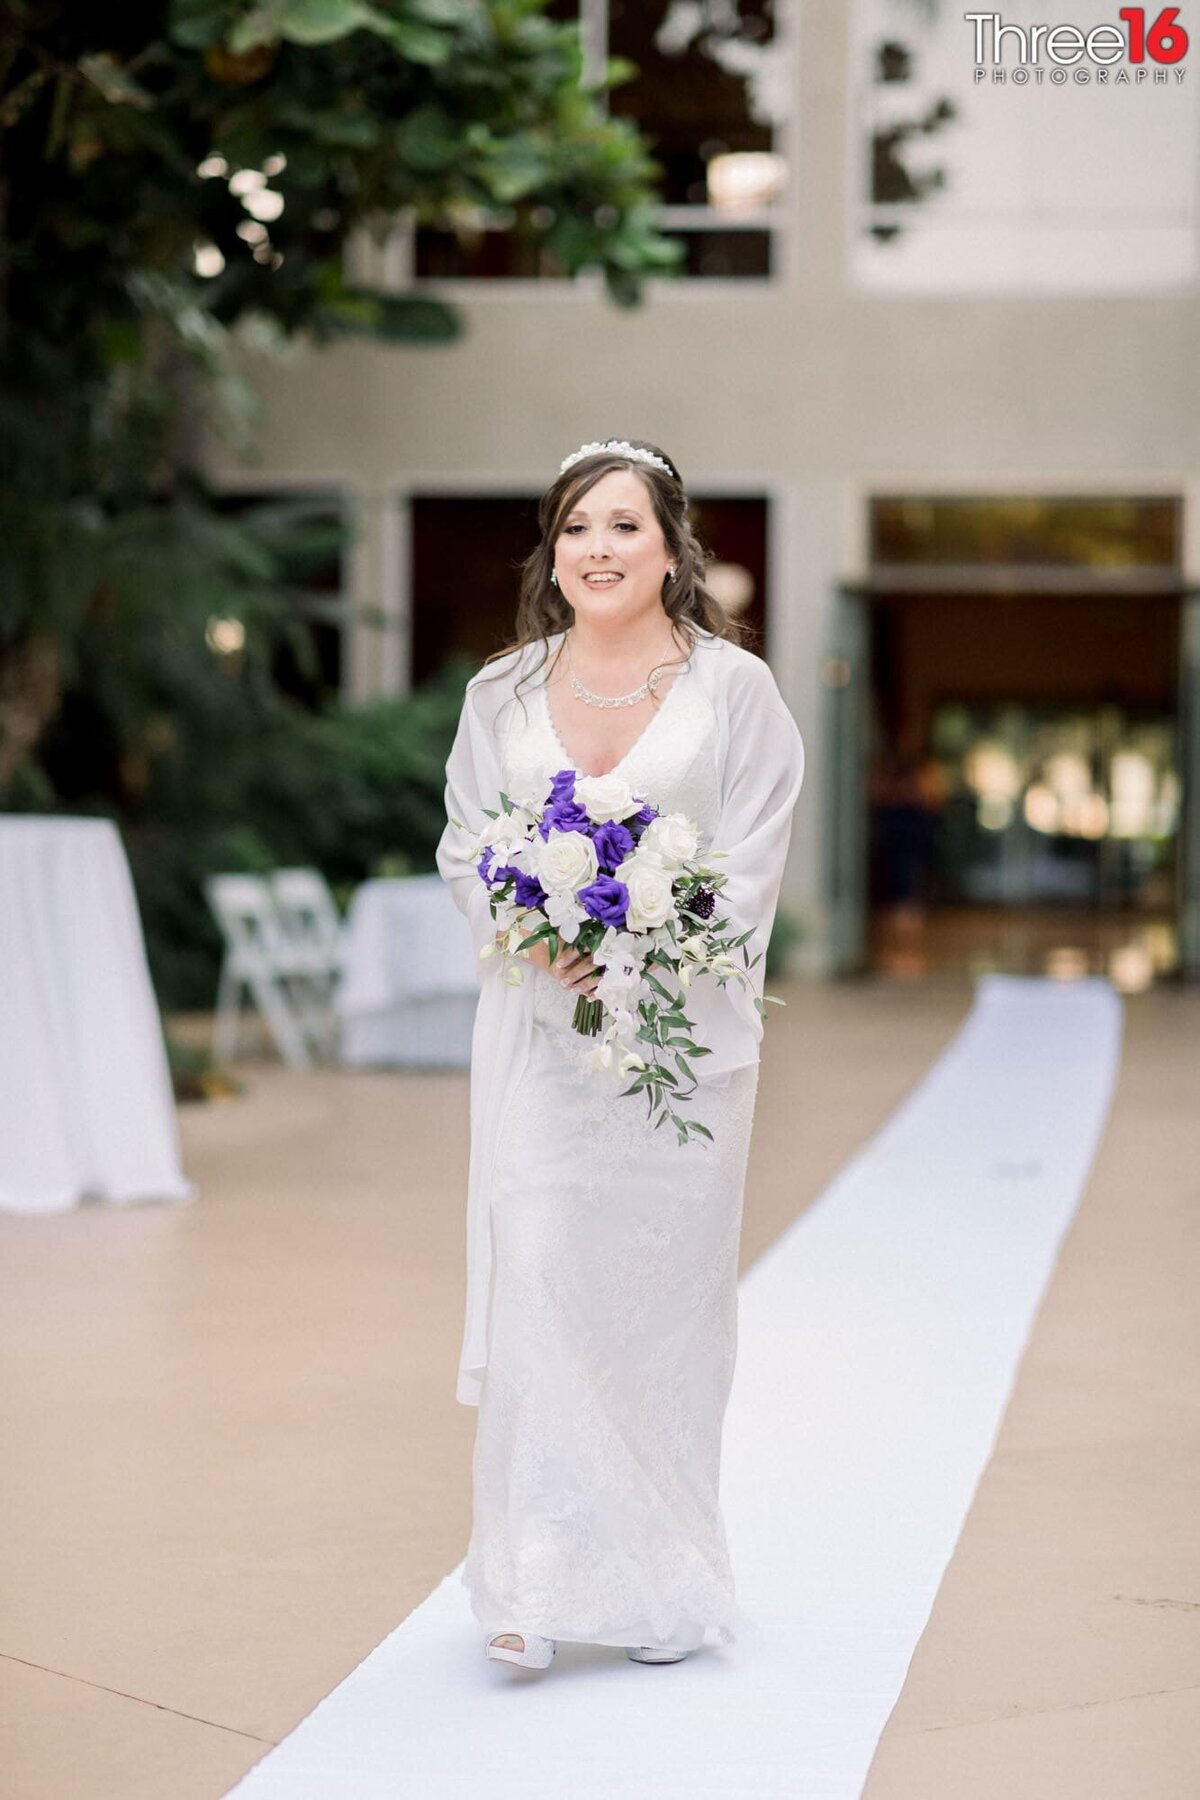 Smiling Bride walks up the aisle with purple & white bouquet in hand